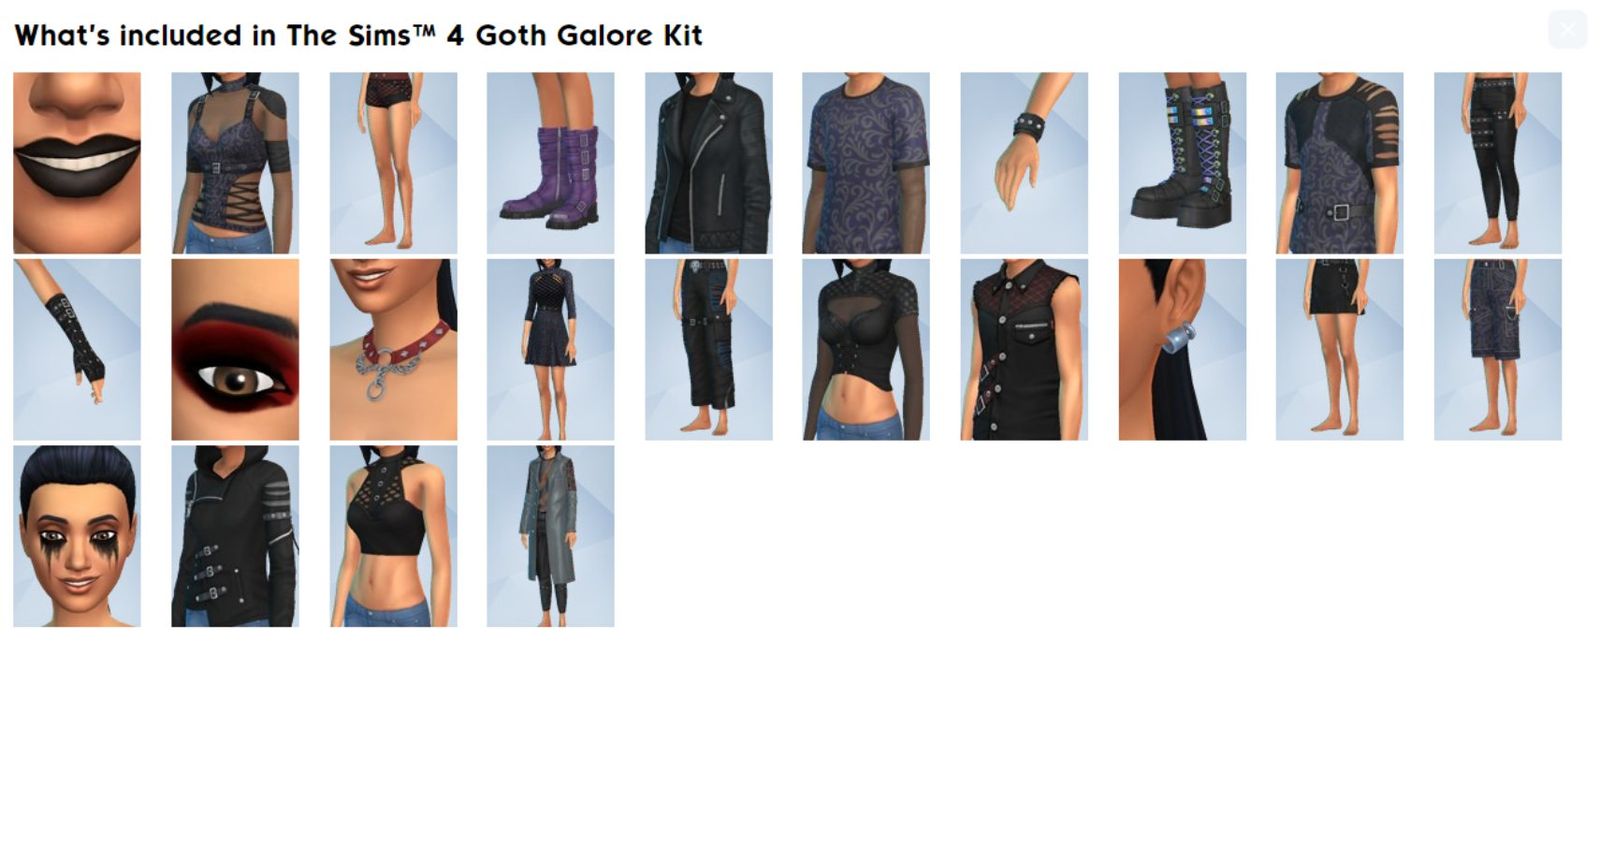 A diagram of everything available in The Sims 4 Goth Galore kit